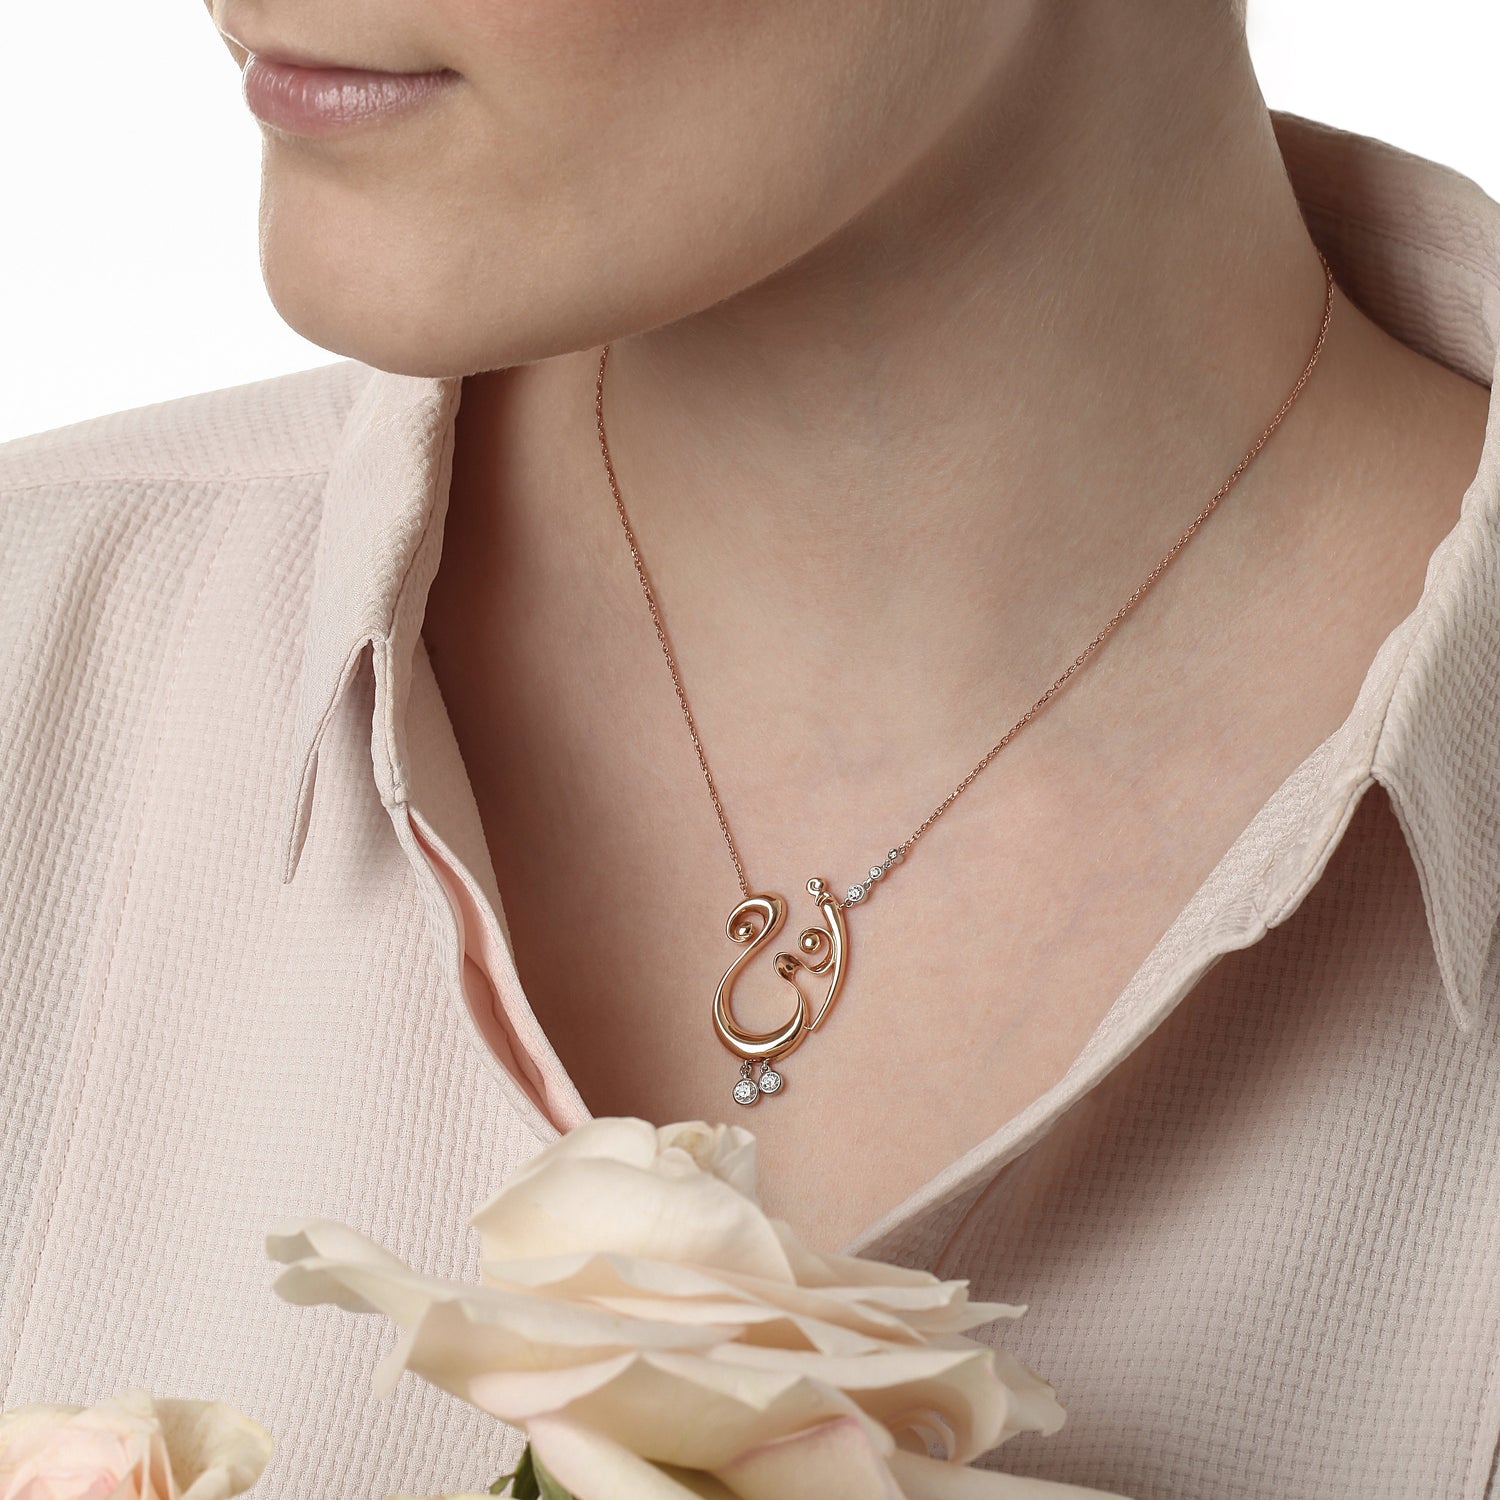 The Mothers' Day Edition - Custom Arabic Letter "Mother" Rose Gold & Diamond Necklace | Best Necklace Design